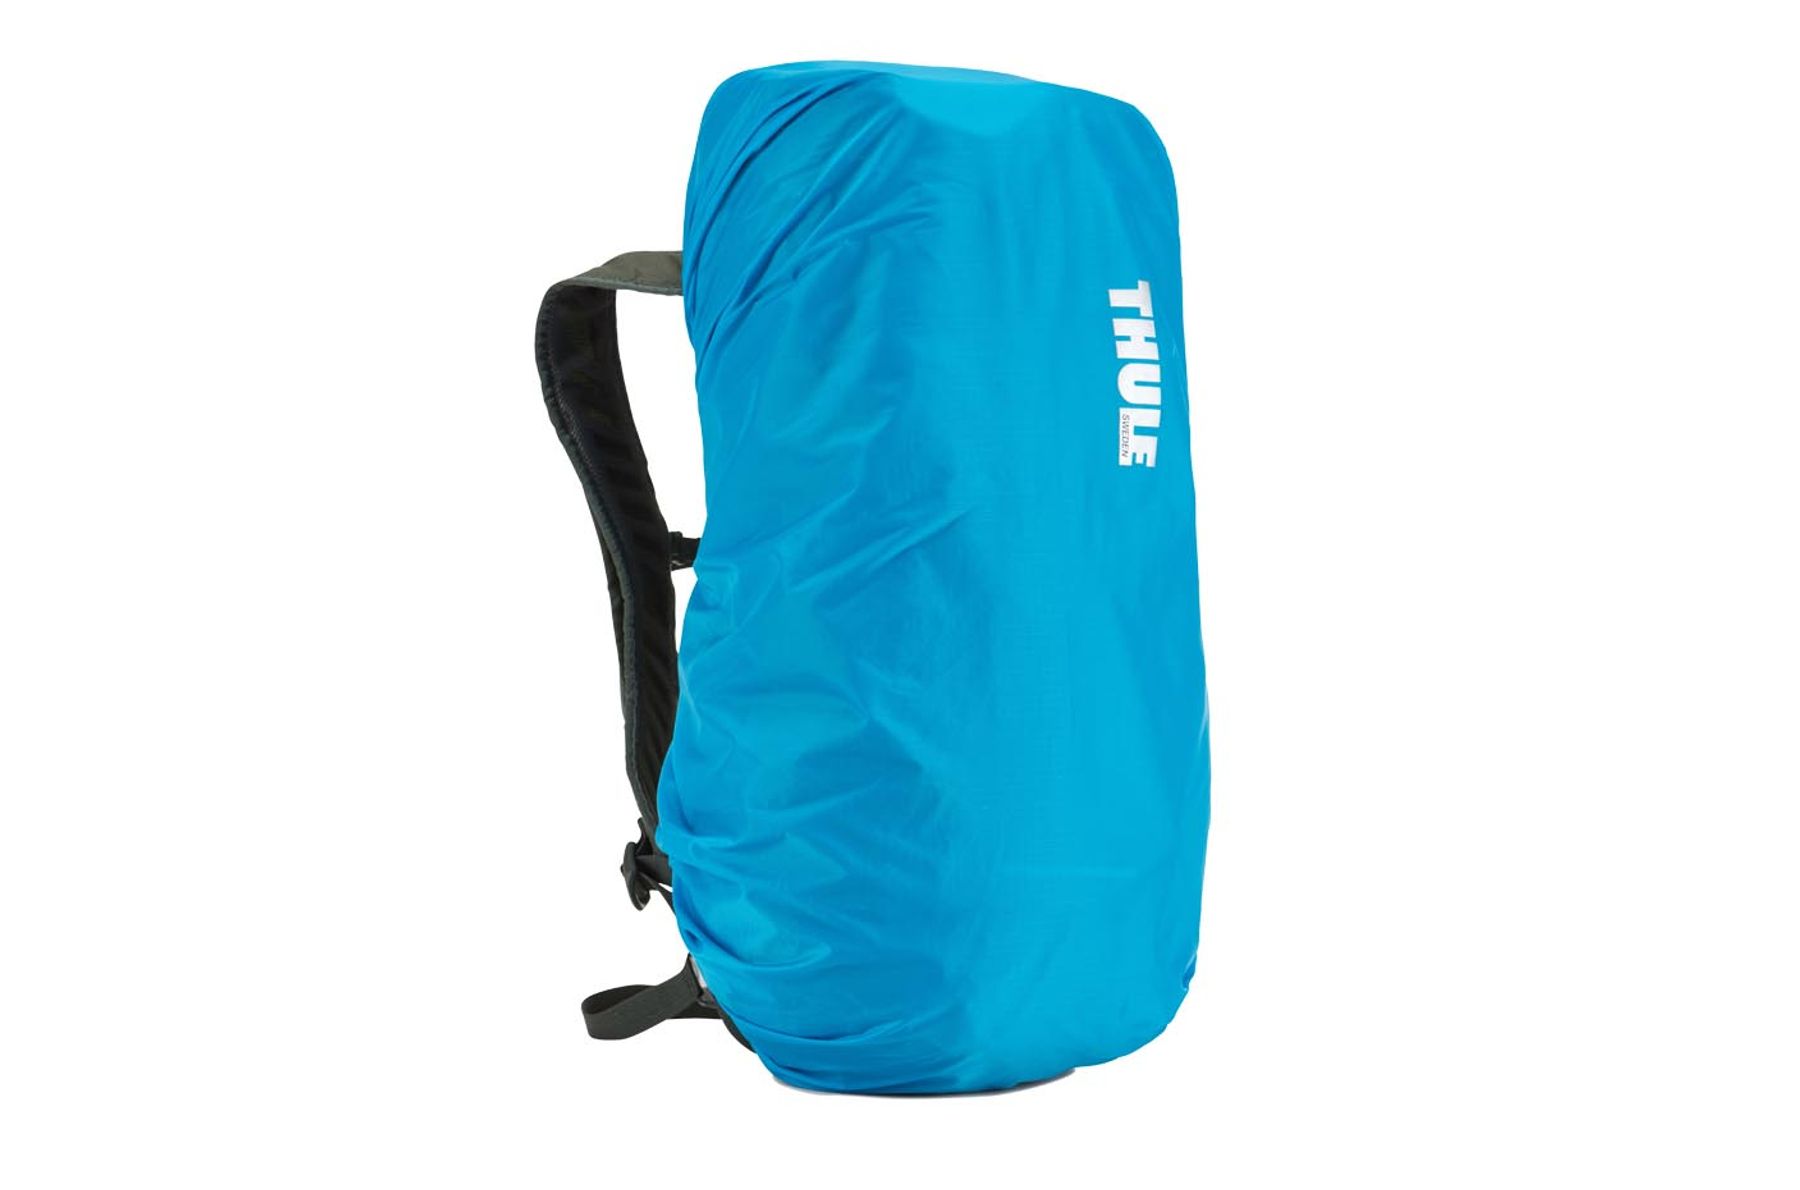 Thule Ran Cover - Keep bag and gear dry